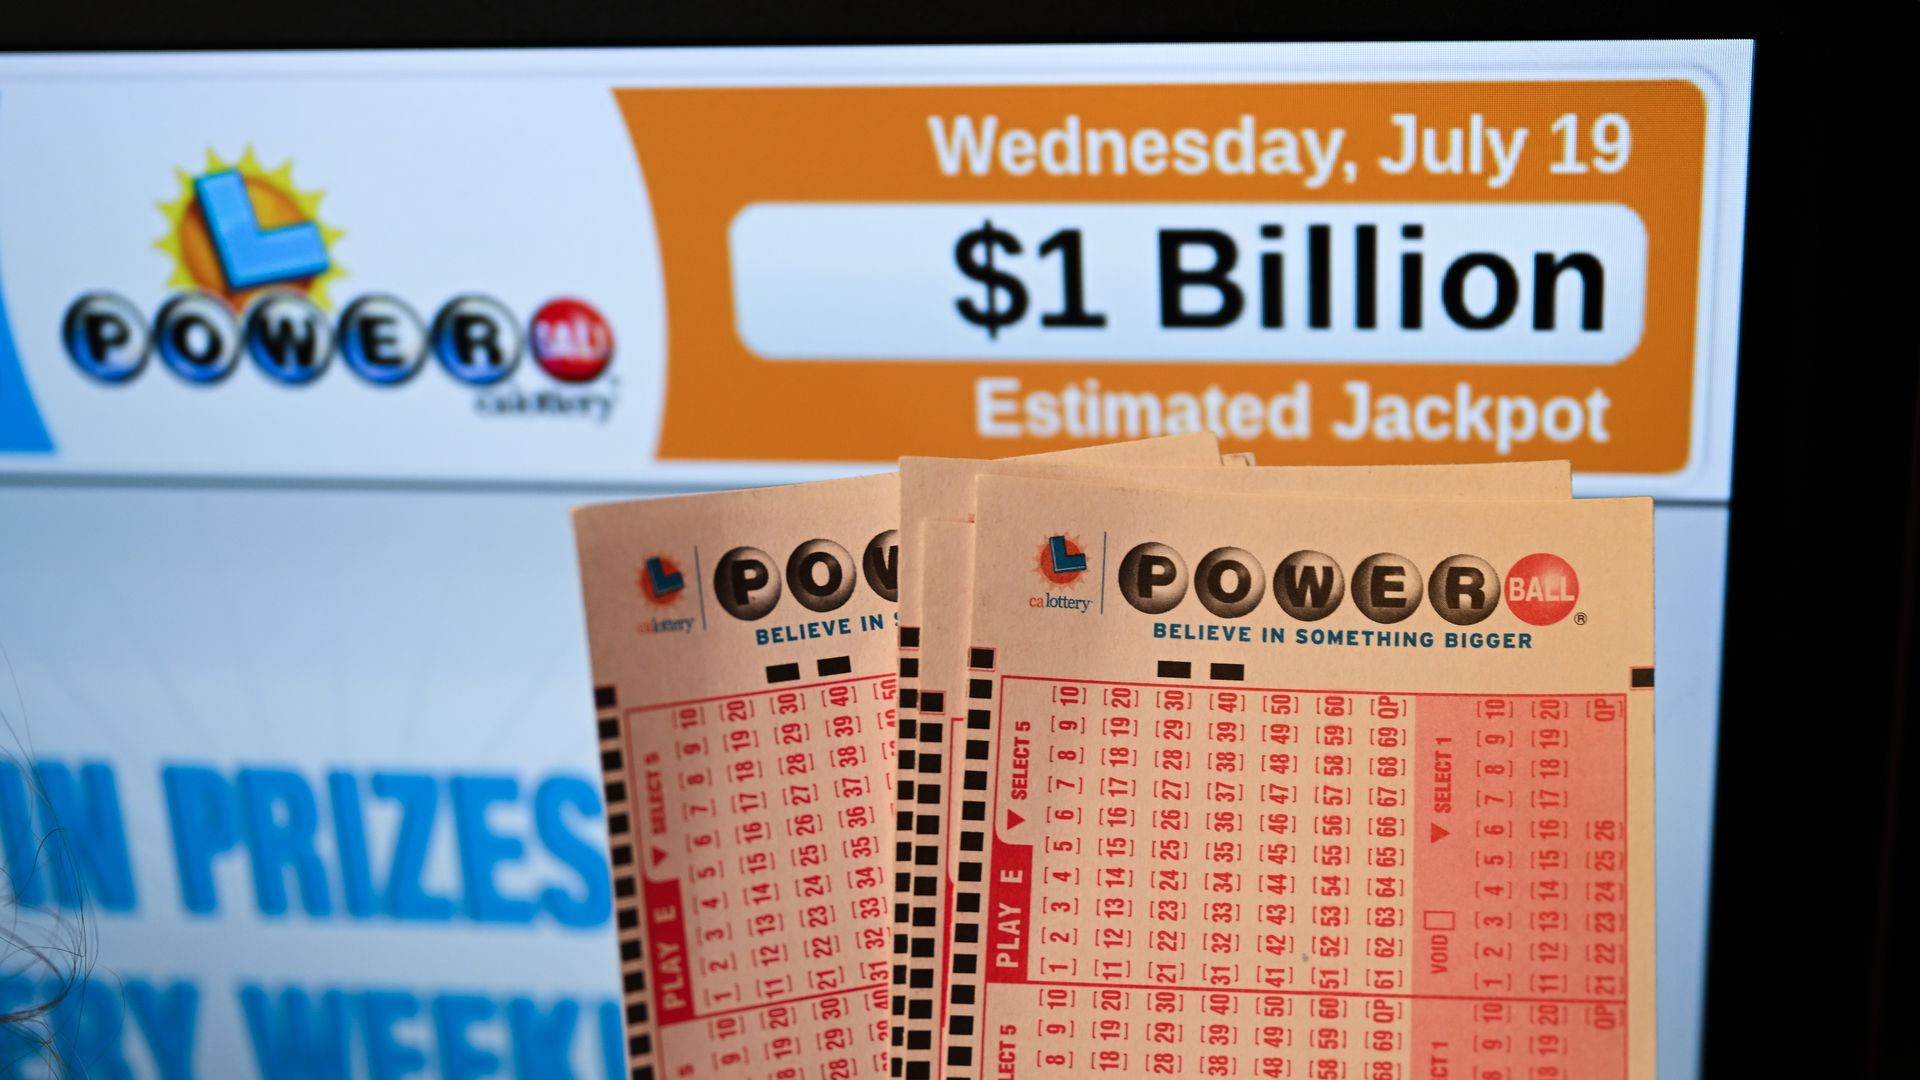 Powerball play slips in front of computer screen that says $1 billion estimated jackpot for Wednesday, July 19